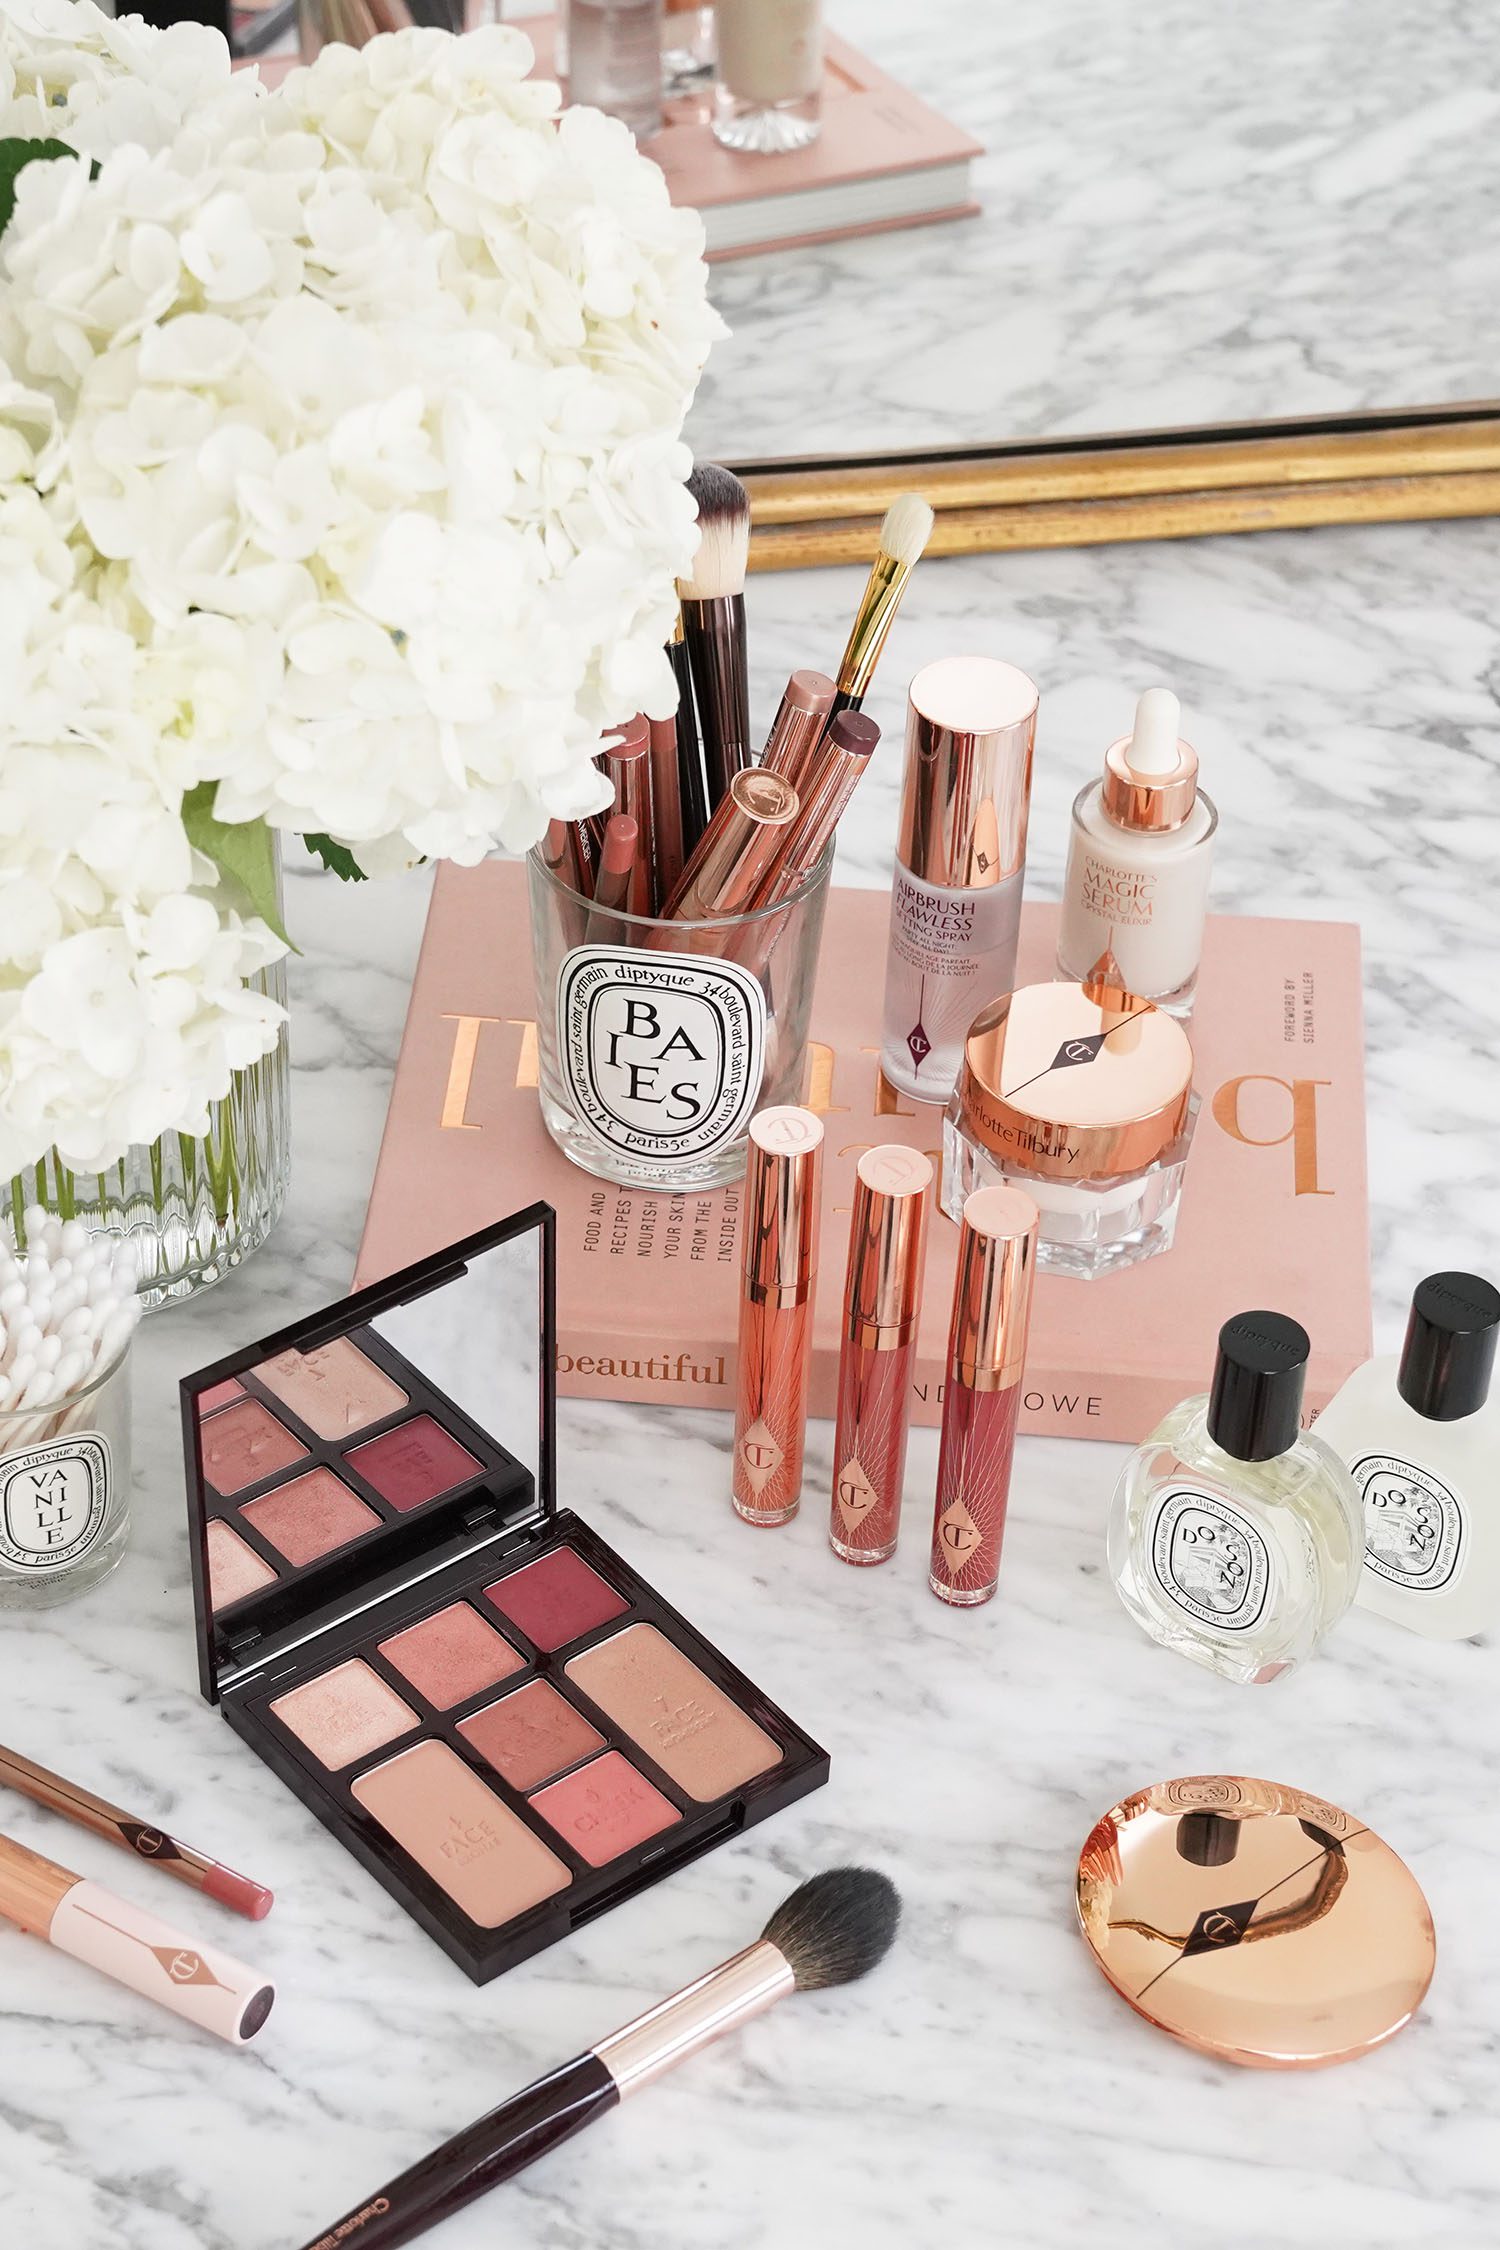 Nordstrom Anniversary Sale 2021 Wishlist + Recommendations - The Beauty  Look Book